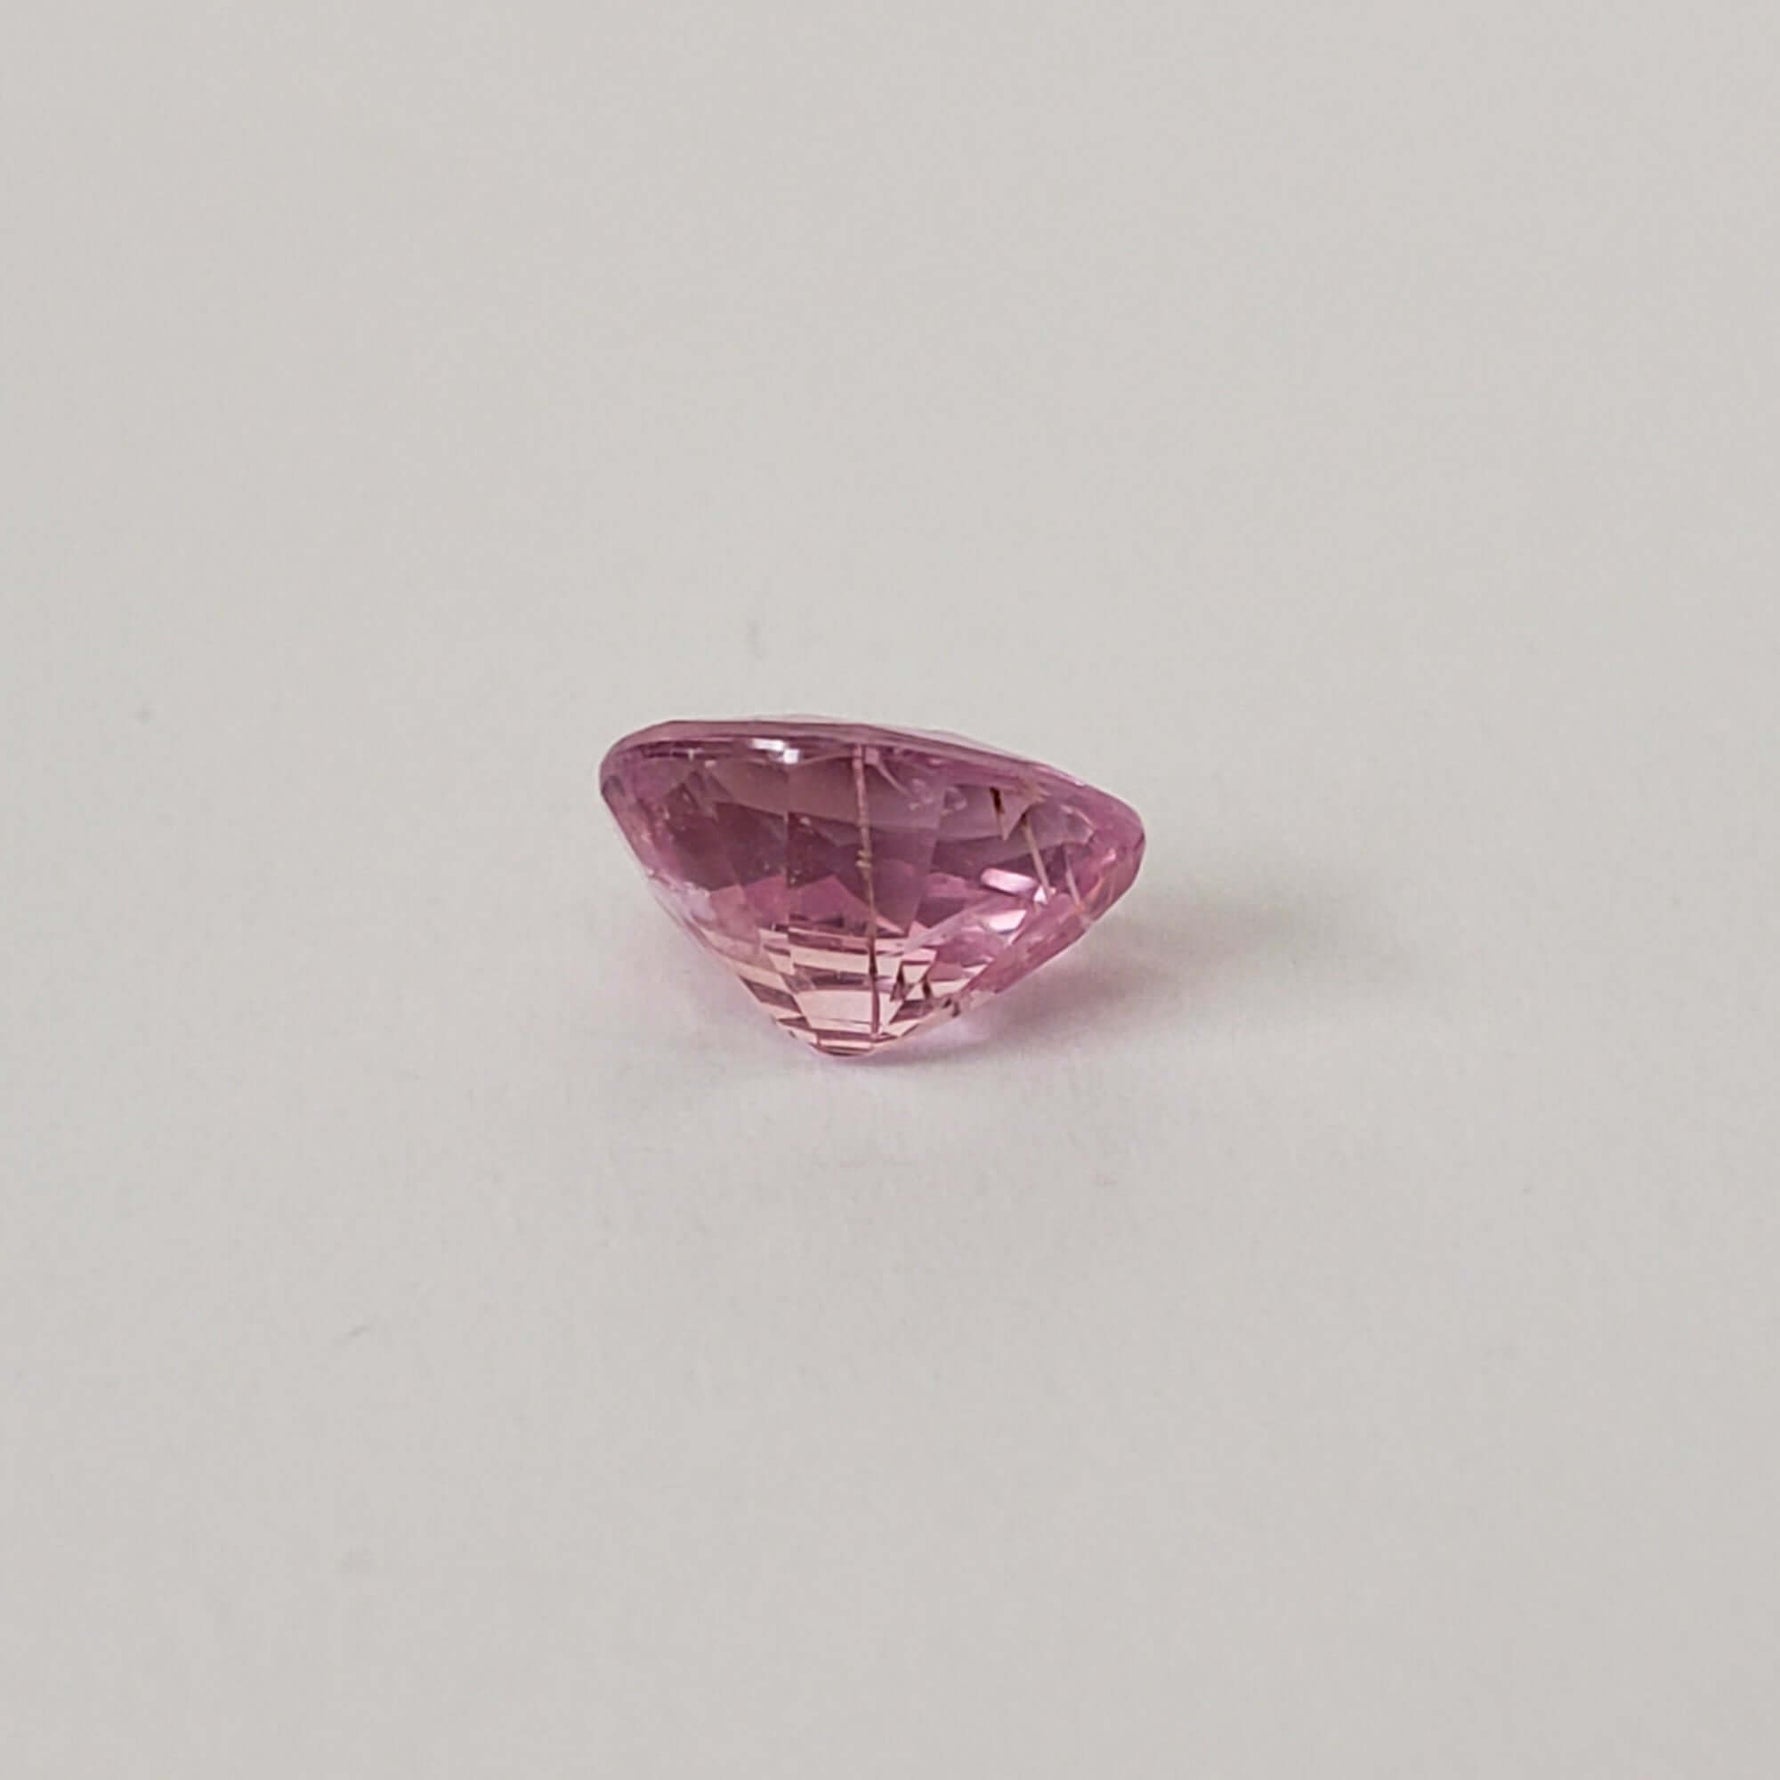 Rutile Sapphire | Oval Cut | Bright Pink | 7.5x6.5mm 1.75ct